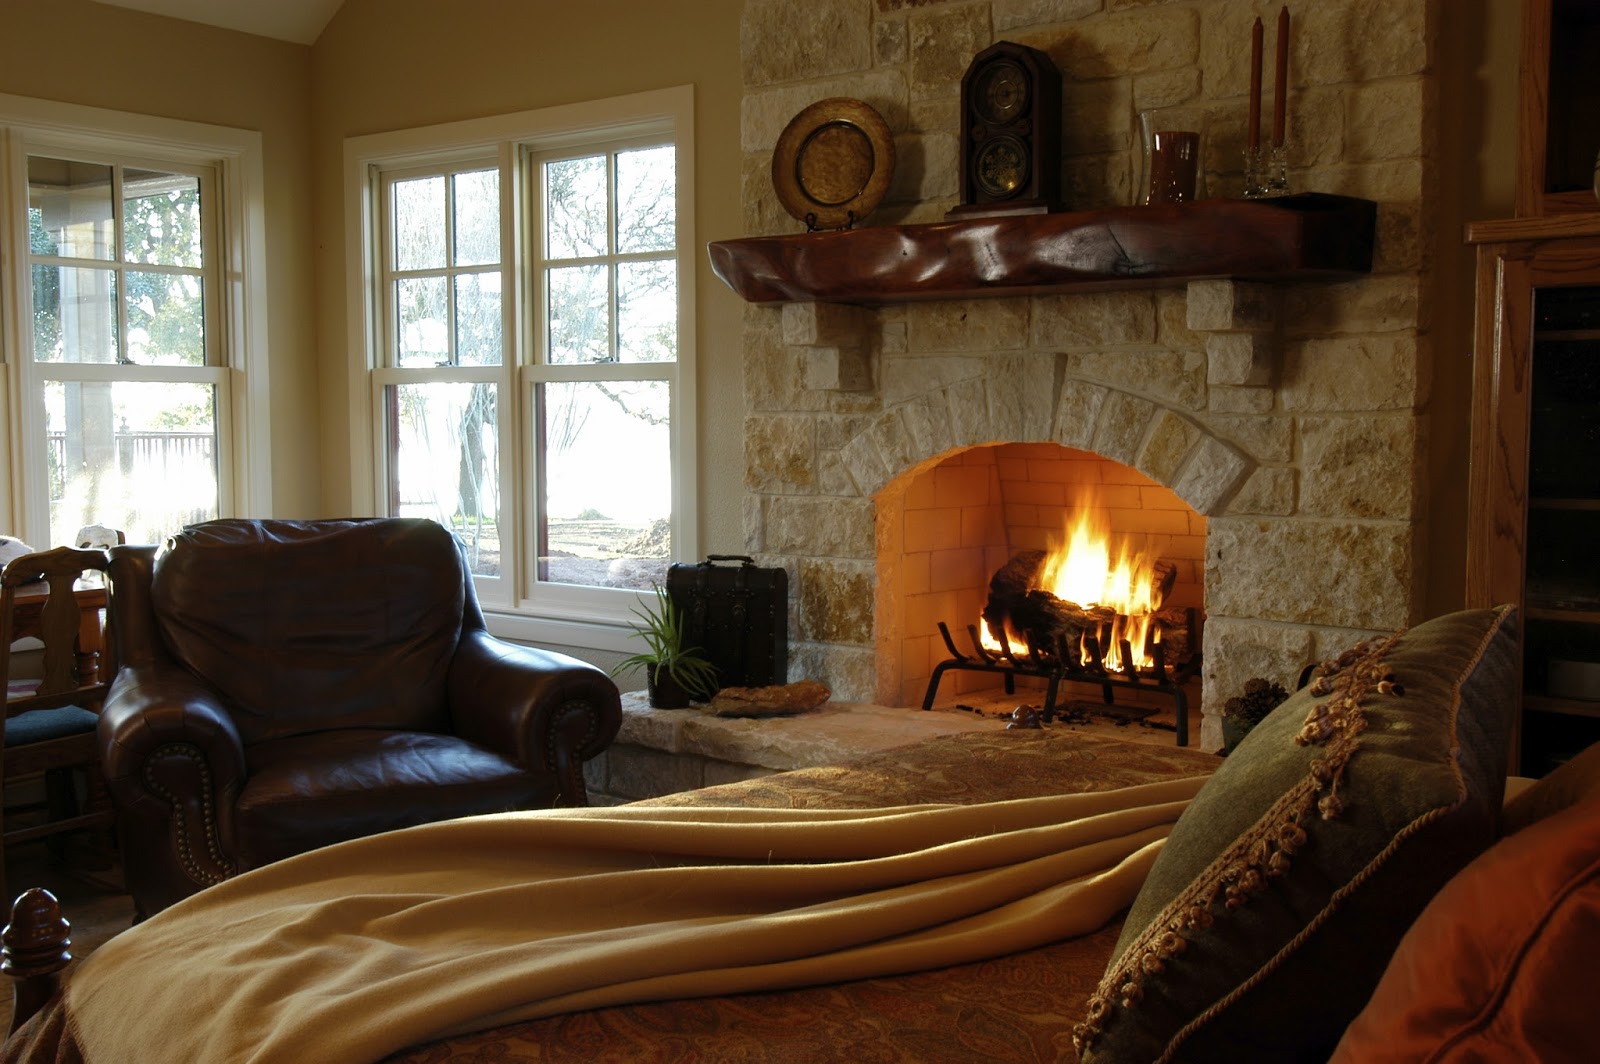 How to Make Your Home Feel Cozy